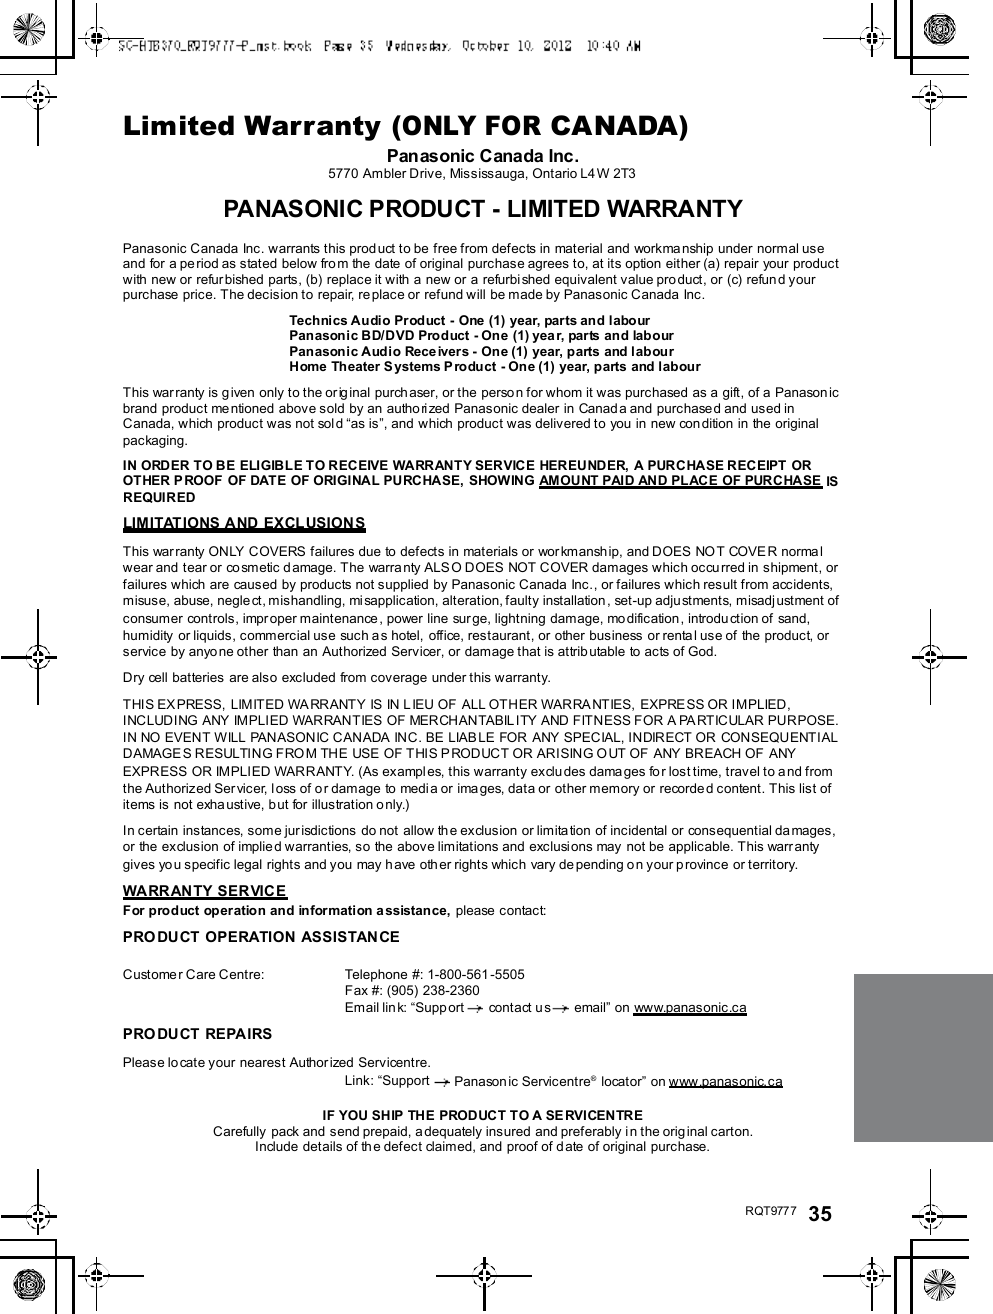 R QT977 7 35Limited Warranty (ONLY FOR CANADA)Panasonic Canada Inc.5770 Ambler Drive, Mississauga, Ontario L4W 2T3PANASONIC PRODUCT - LIMITED WARRANTYPanasonic Canada Inc. warrants this prod uct to be free from defects in material and workma nship under normal useand for a period as stated below from the date of original purchase agrees to, at its option either (a) repair your productwith new or refurbished parts, (b) replace it with a new or a refurbi shed equivalent value product, or (c) refun d yourpurchase price. The decision to repair, replace or refund will be made by Panasonic Canada Inc.Technics Audio Product - One (1) year, parts and labourPanasonic BD/DVD Product - One (1) year, parts and labourPanasonic Audio Receivers - One (1) year, parts and labourHome Theater Systems Product - One (1) year, parts and labourThis war ranty is given only to the orig inal purch aser, or the person for whom it was purchased as a gift, of a Panasonicbrand product me ntioned above sold by an authorized Panasonic dealer in Canada and purchased and used inCanada, which product was not sol d as is, and which product was delivered to you in new condition in the originalpackaging.IN ORDER TO BE ELIGIBLE TO RECEIVE WARRANTY SERVICE HEREUNDER, A PURCHASE RECEIPT OROT HER P ROOF  OF DATE OF ORIGINA L PU RC HASE,  SHOW ING AMOU NT PAI D AN D PL ACE OF PURCHASE  ISREQUIREDLIMITATIONS AND EXCLUSIONSThis war ranty ONLY COVERS failures due to defects in materials or wor kmanship, and DOES NOT COVE R normalwear and tear or co smetic damage. The warranty ALS O DOES NOT COVER damages which occurred in shipment, orfailures which are caused by products not supplied by Panasonic Canada Inc., or failures which result from accidents,misuse, abuse, negle ct, mishandling, misapplication, alteration, faulty installation, set-up adju stments, misadjustment ofconsumer controls, impr oper maintenance , power line sur ge, lightning damage, mo dification, introdu ction of sand,humidity  or liquids, commercial use such as hotel, office, restaurant, or other business or renta l use of the product, orservice by anyone other than an Authorized Servicer, or damage that is attributable to acts of God.Dry cell batteries are also excluded from coverage under this warranty.THIS EXPRESS, LIMITED WARRANTY IS IN L IEU OF ALL OTHER WARRANTIES,  EXPRESS OR IMPLIED,INCLUDING ANY IMPLIED WARRANTIES OF MERCHANTABILITY AND FITNESS FOR A PARTICULAR PURPOSE.IN NO EVENT WILL PANASONIC CANADA INC. BE LIABLE FOR ANY SPECIAL, INDIRECT OR CONSEQUENTIALDAMAGE S RESULTING FROM THE USE OF THIS PRODUCT OR ARISING OUT OF  ANY BREACH OF ANYEXPRESS OR IMPLIED WARRANTY. (As exampl es, this warranty excludes dama ges for lost time, travel to and fromthe Authorized Servicer, l oss of or damage to media or ima ges, data or other memory or recorde d content. This list ofitems is not exha ustive, but for illustration o nly.)In certain instances, some jur isdictions do not allow th e exclusion or limitation of incidental or consequential da mages,or the exclusion of implied warranties, so the above limitations and exclusions may not be applicable. This warr antygives you specific legal rights and you may have other rights which vary depending on your p rovince or territory.WARRANTY SERVICEFor product operation and information assistance, please contact:PRO DU CT OPERATION ASSISTAN CECustomer Care Centre: Telephone #: 1-800-561 -5505Fax #: (905) 238-2360Email lin k: Supp ort  contact us  email on www.panasonic.caPRO DU CT REPAIRSPlease lo cate your nearest Author ized Servicentre.Link: Support  Panasonic Servicentre® locator on www.panasonic.caIF YOU SHIP THE PROD UCT T O A SE RVI CEN TRECarefully  pack and send prepaid, a dequately insured  and preferably i n the original carton.Include details of the defect claimed, and proof of date of original purchase.